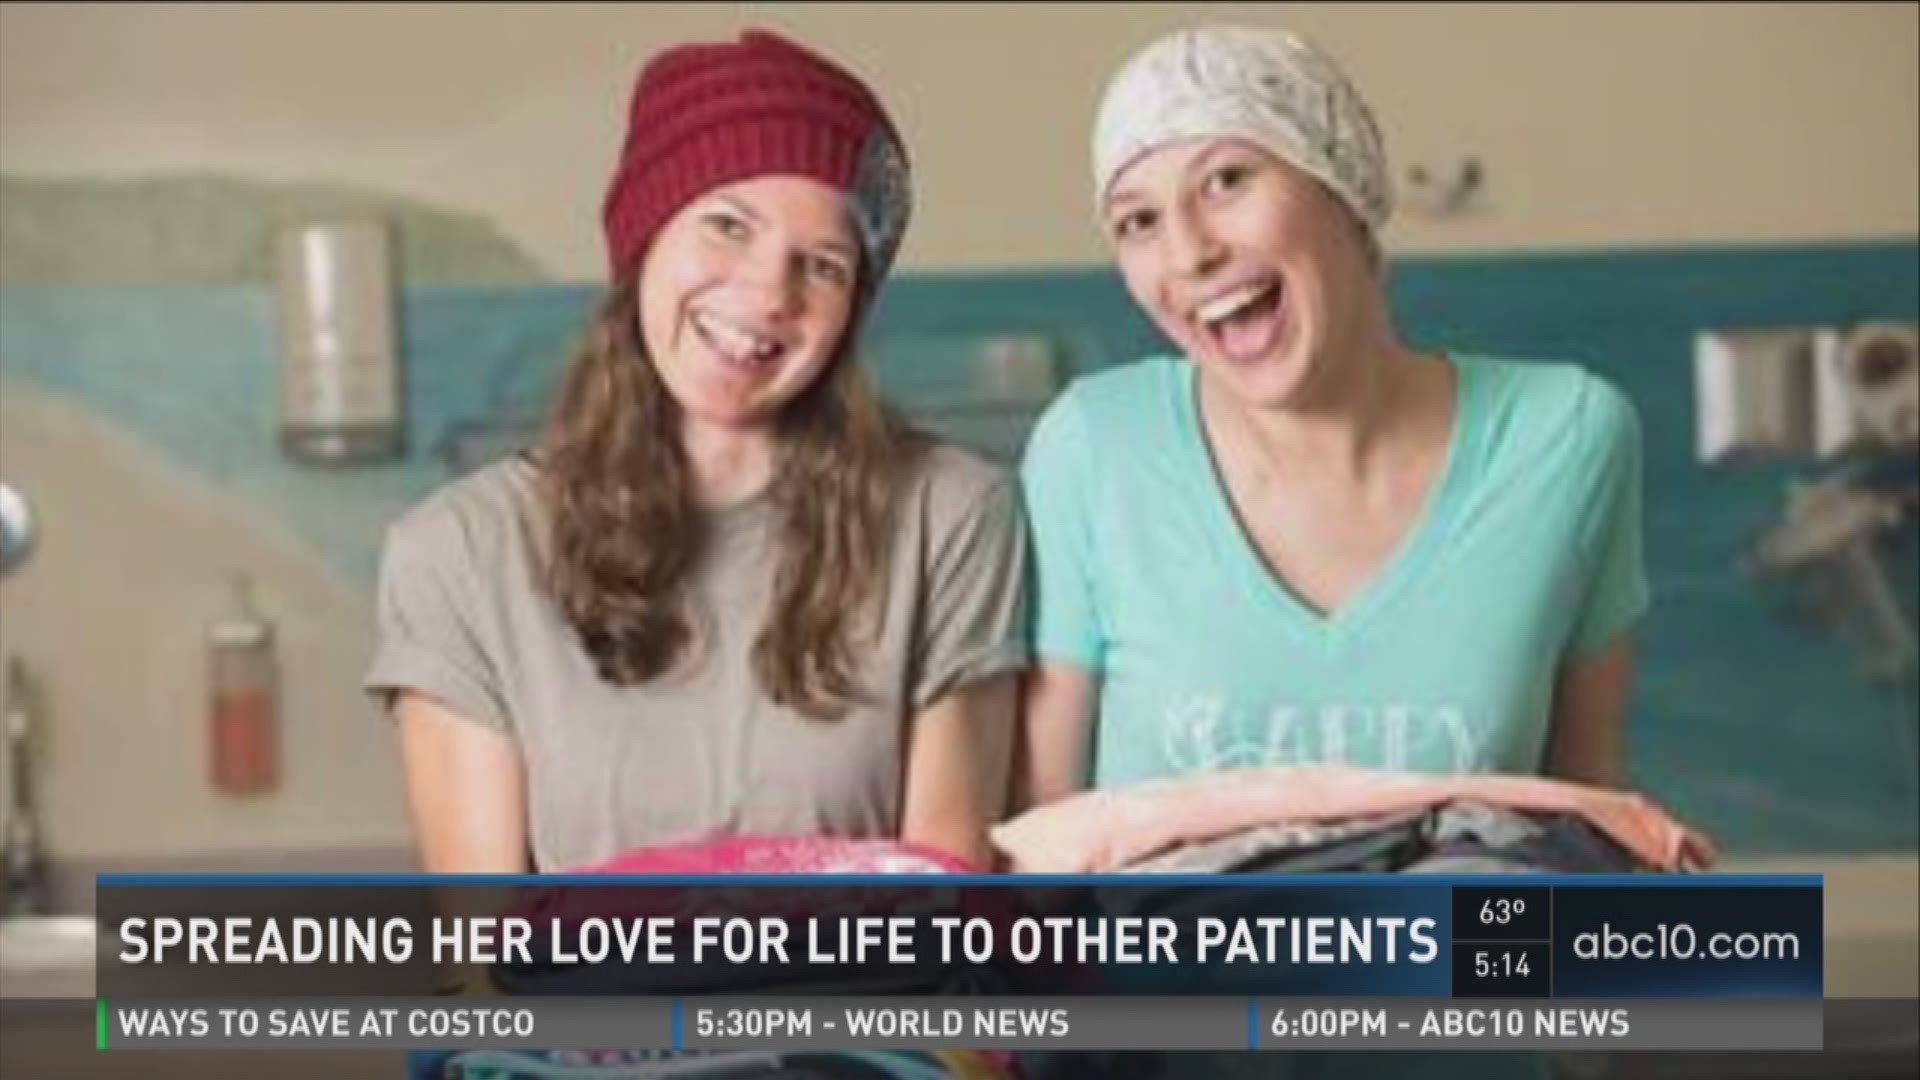 Even when a local cancer patient talks about her leukemia, she has a smile on her face.